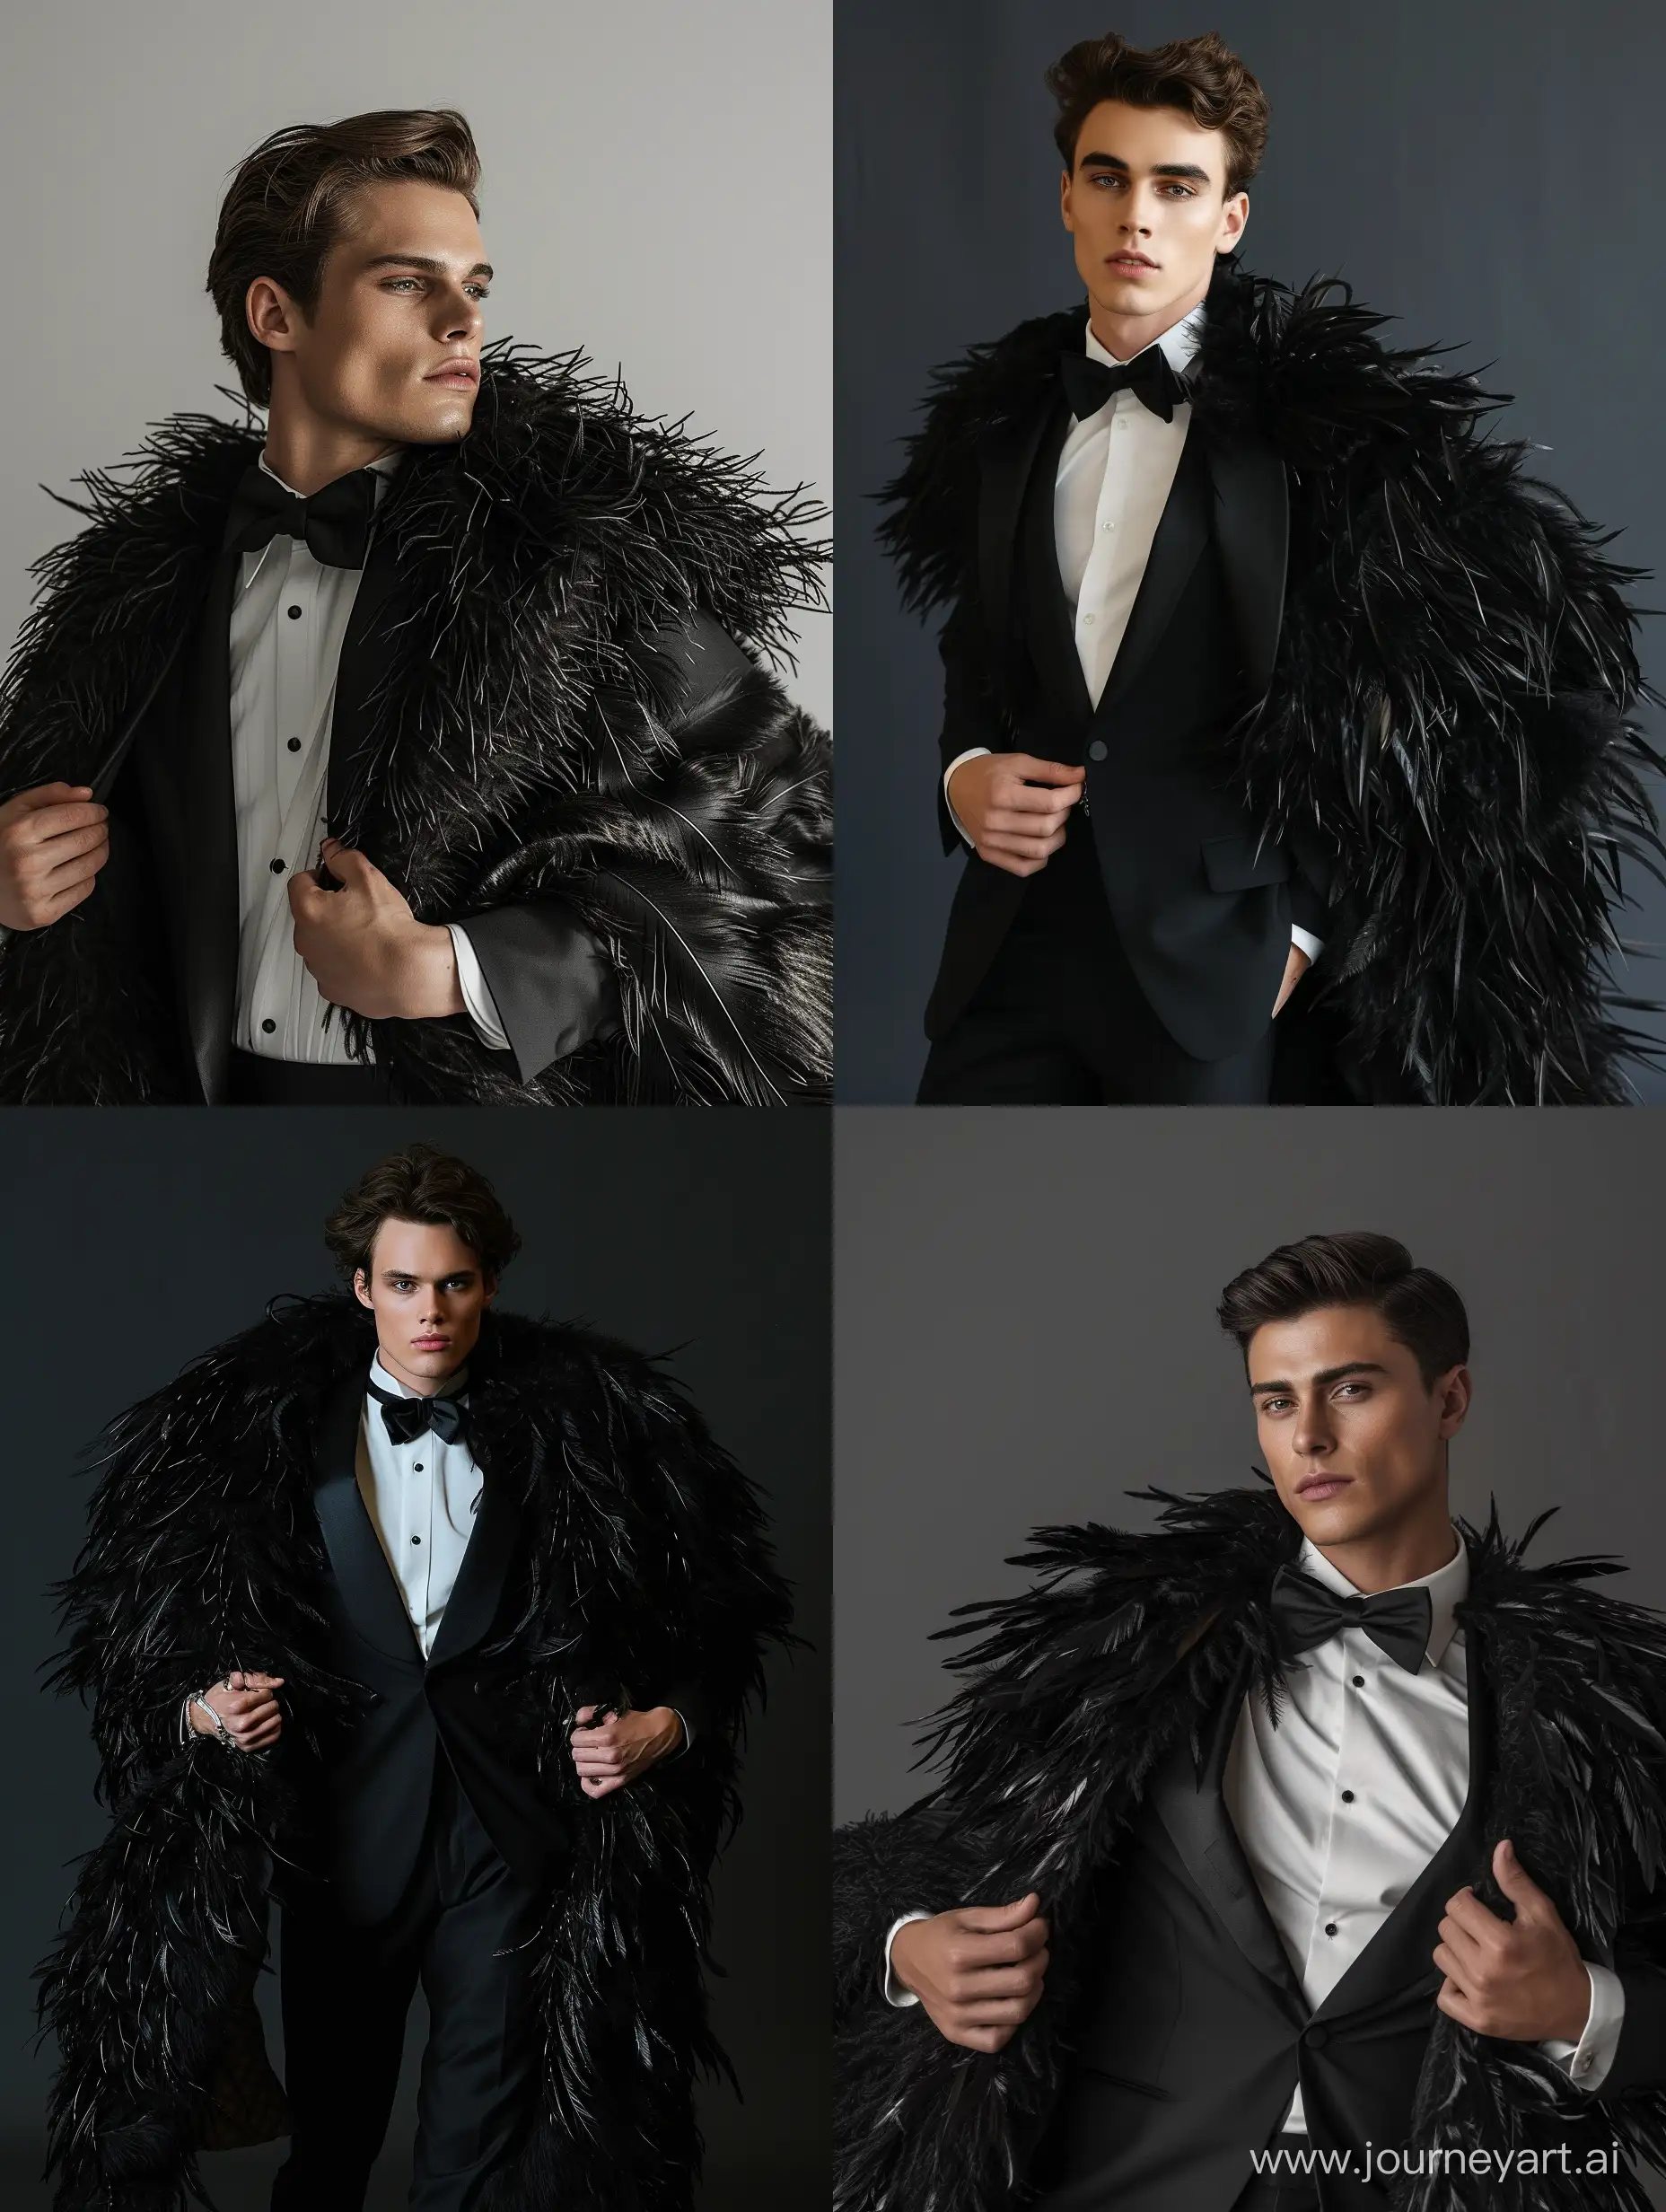 Stylish-20YearOld-in-Black-Tuxedo-and-Ostrich-Feather-Fur-Coat-Old-Hollywood-Glamour